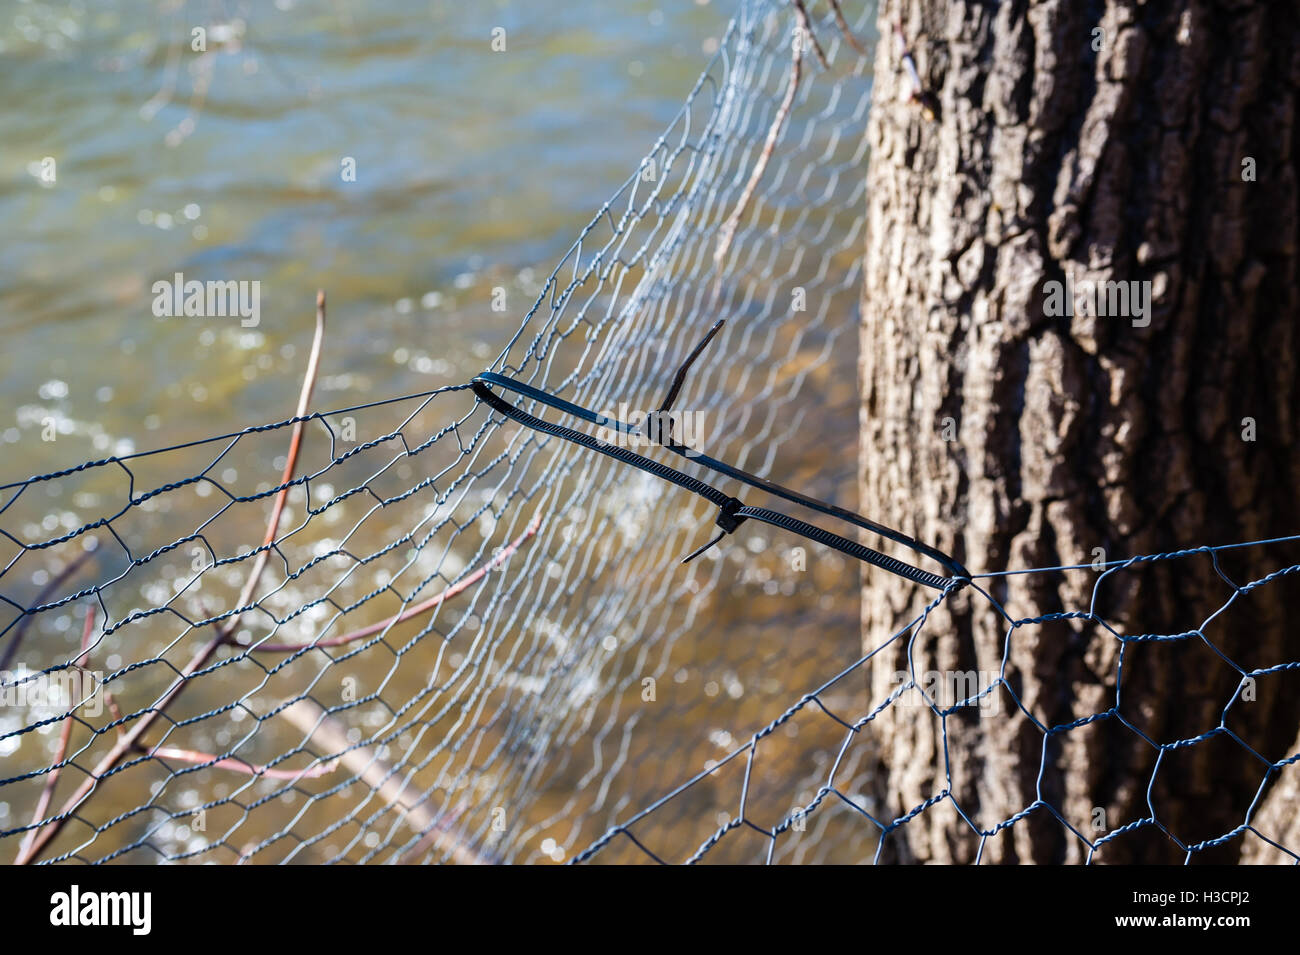 Plastic zip ties holding thin wire fences together near tree and water. Stock Photo